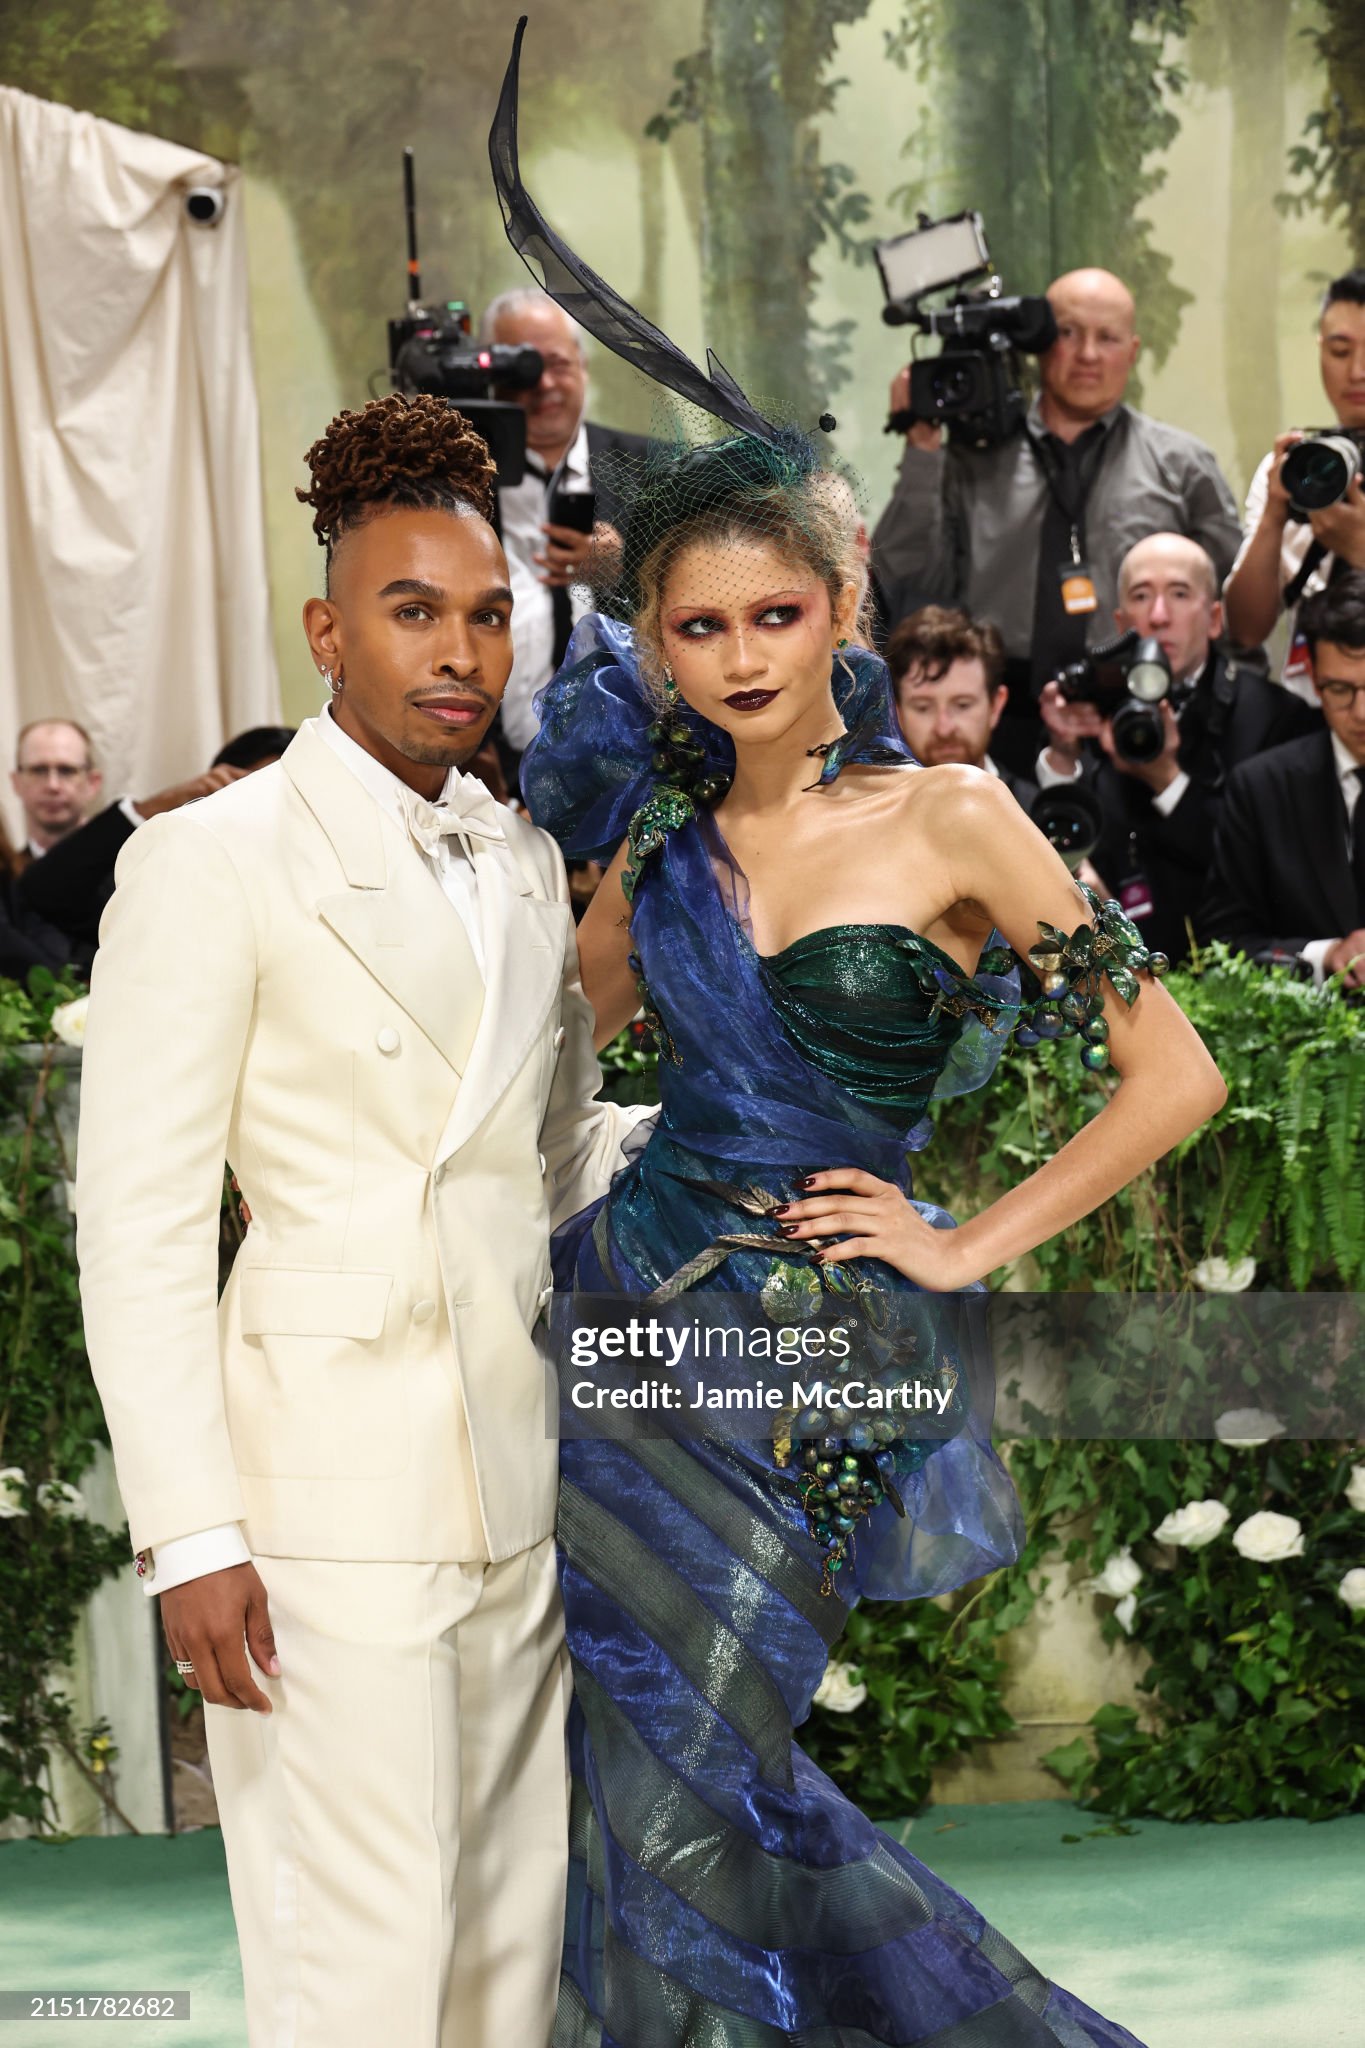 gettyimages-2151782682-2048x2048.jpg